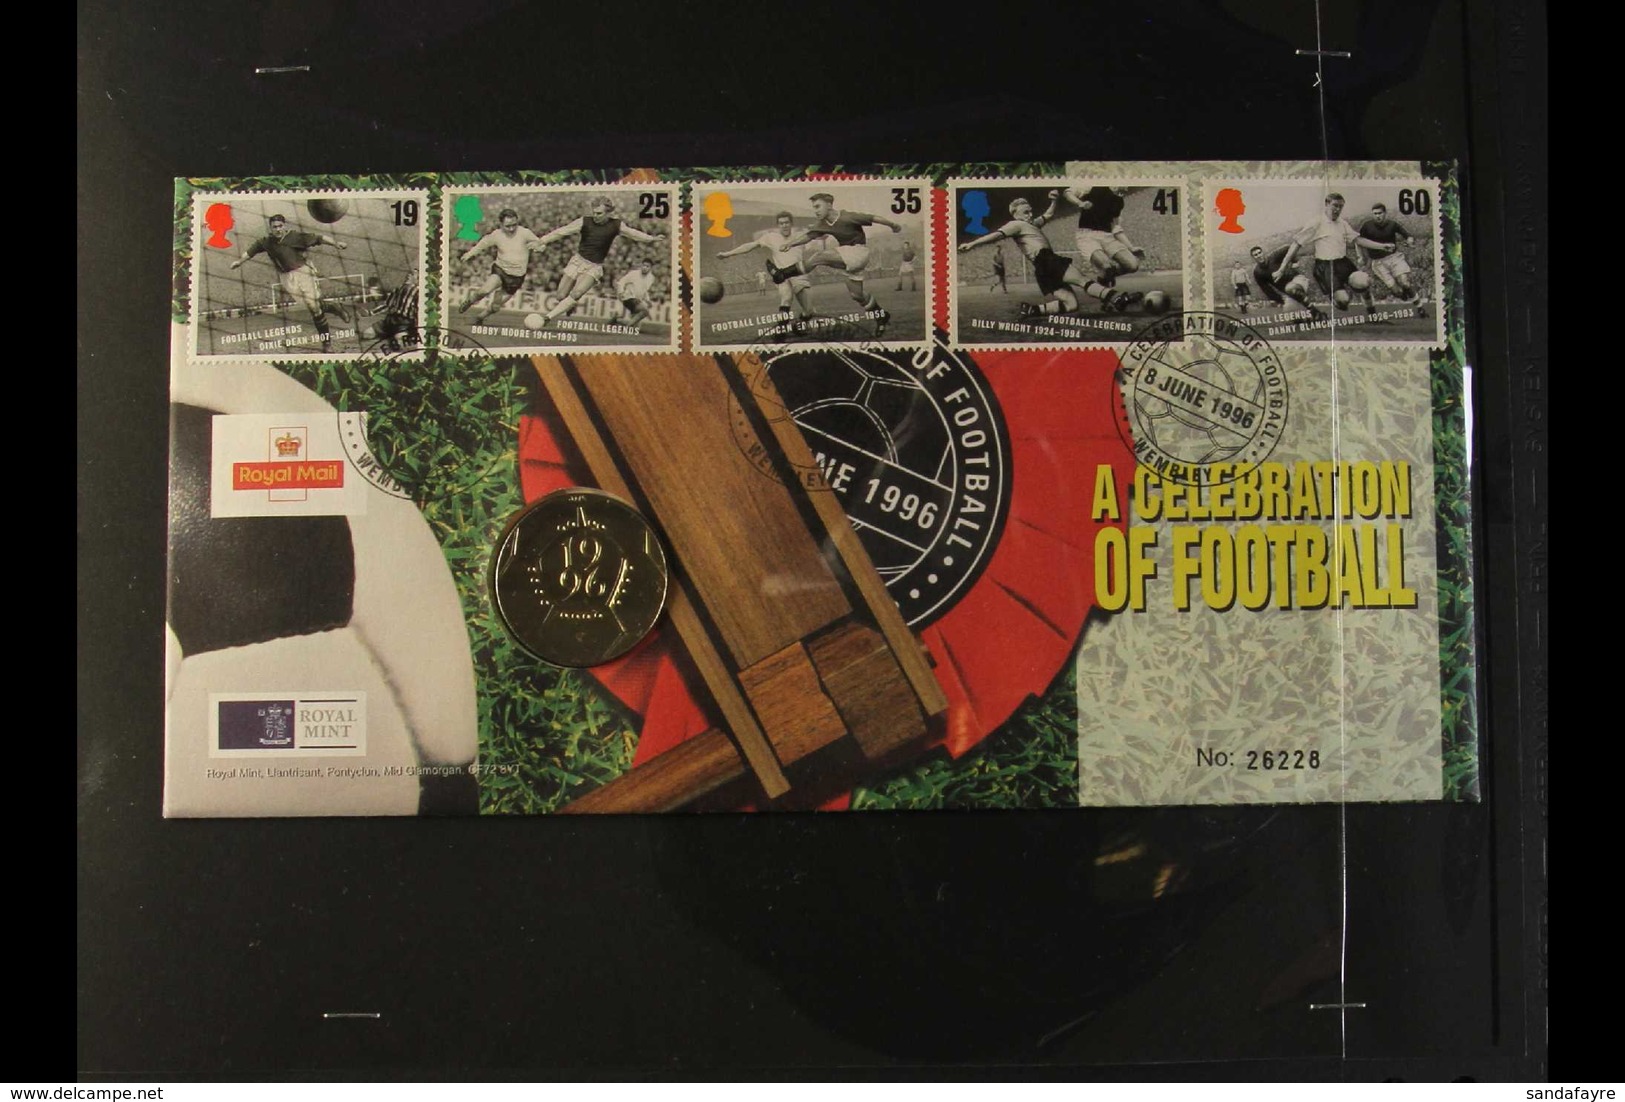 1996-2014 SPORT COIN COVERS A Royal Mint Ltd Edition Group Of Coin Covers Inc 1996 £2 Celebration Of Football Cover, 199 - FDC